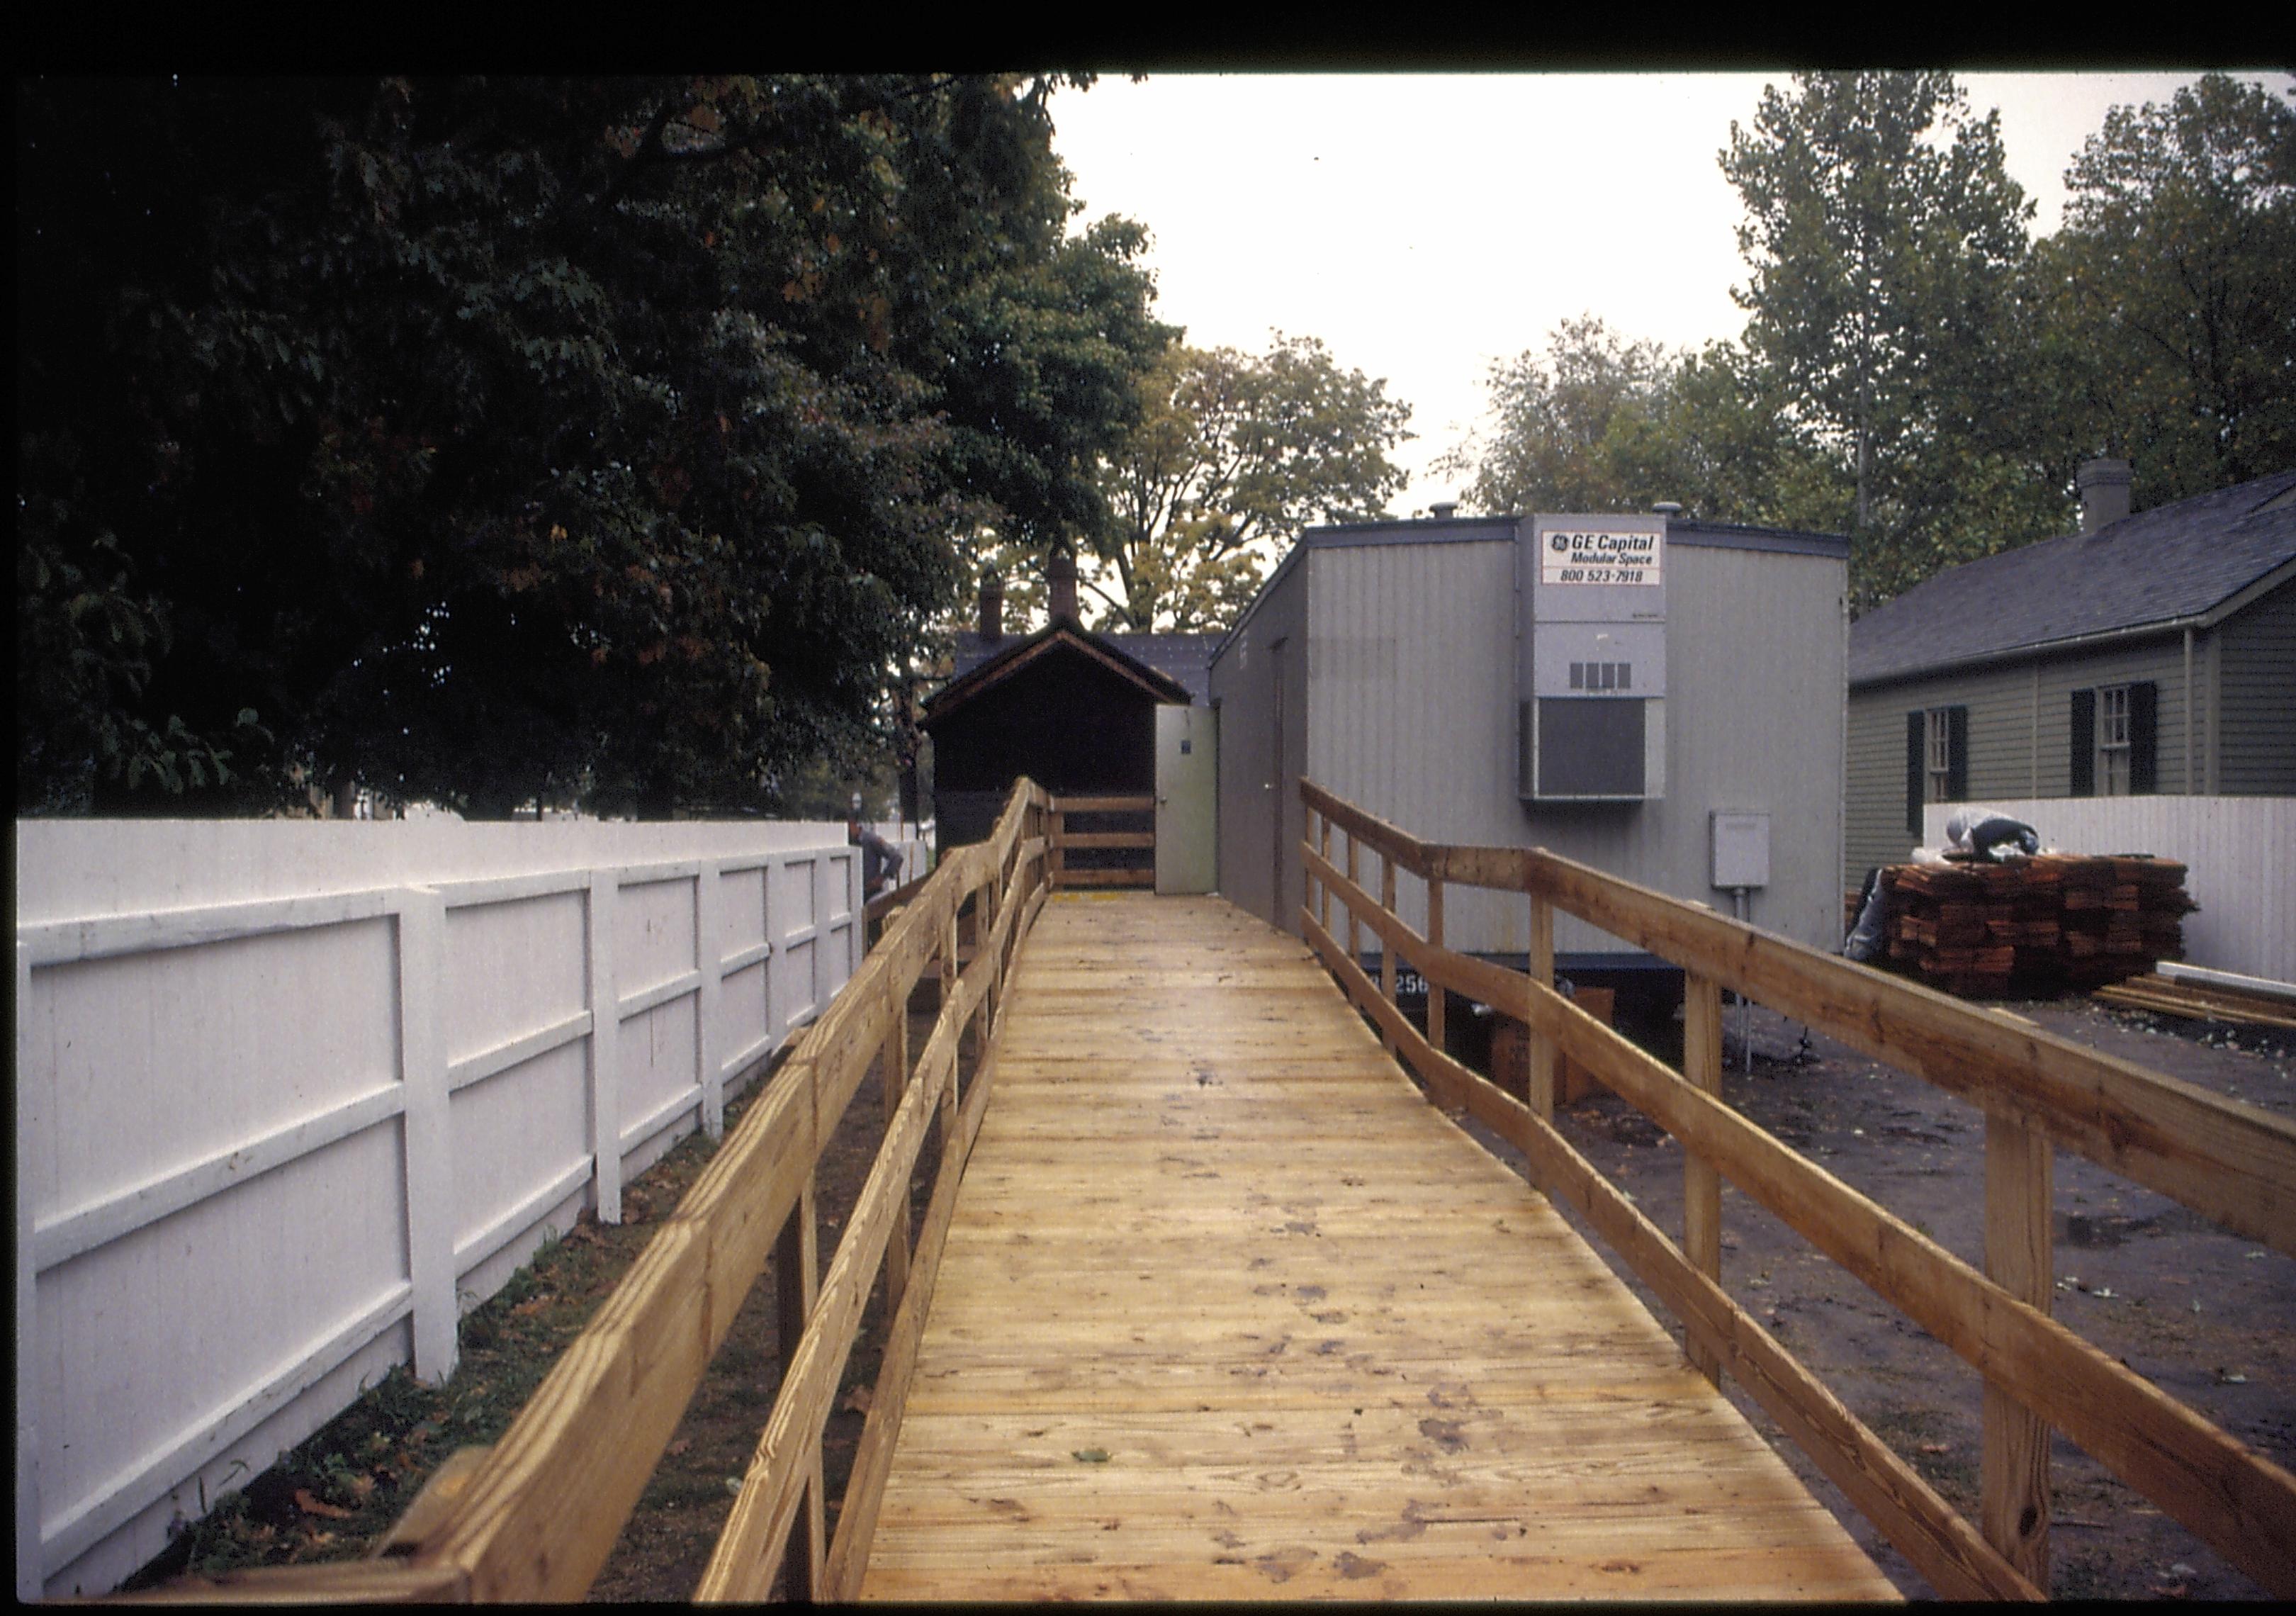 Restroom trailer access ramp Lincoln Home NHS- Visitor Center remodel,  Roll 1999-11 exp 6 Visitor Center, Corneau, restroom, temporary